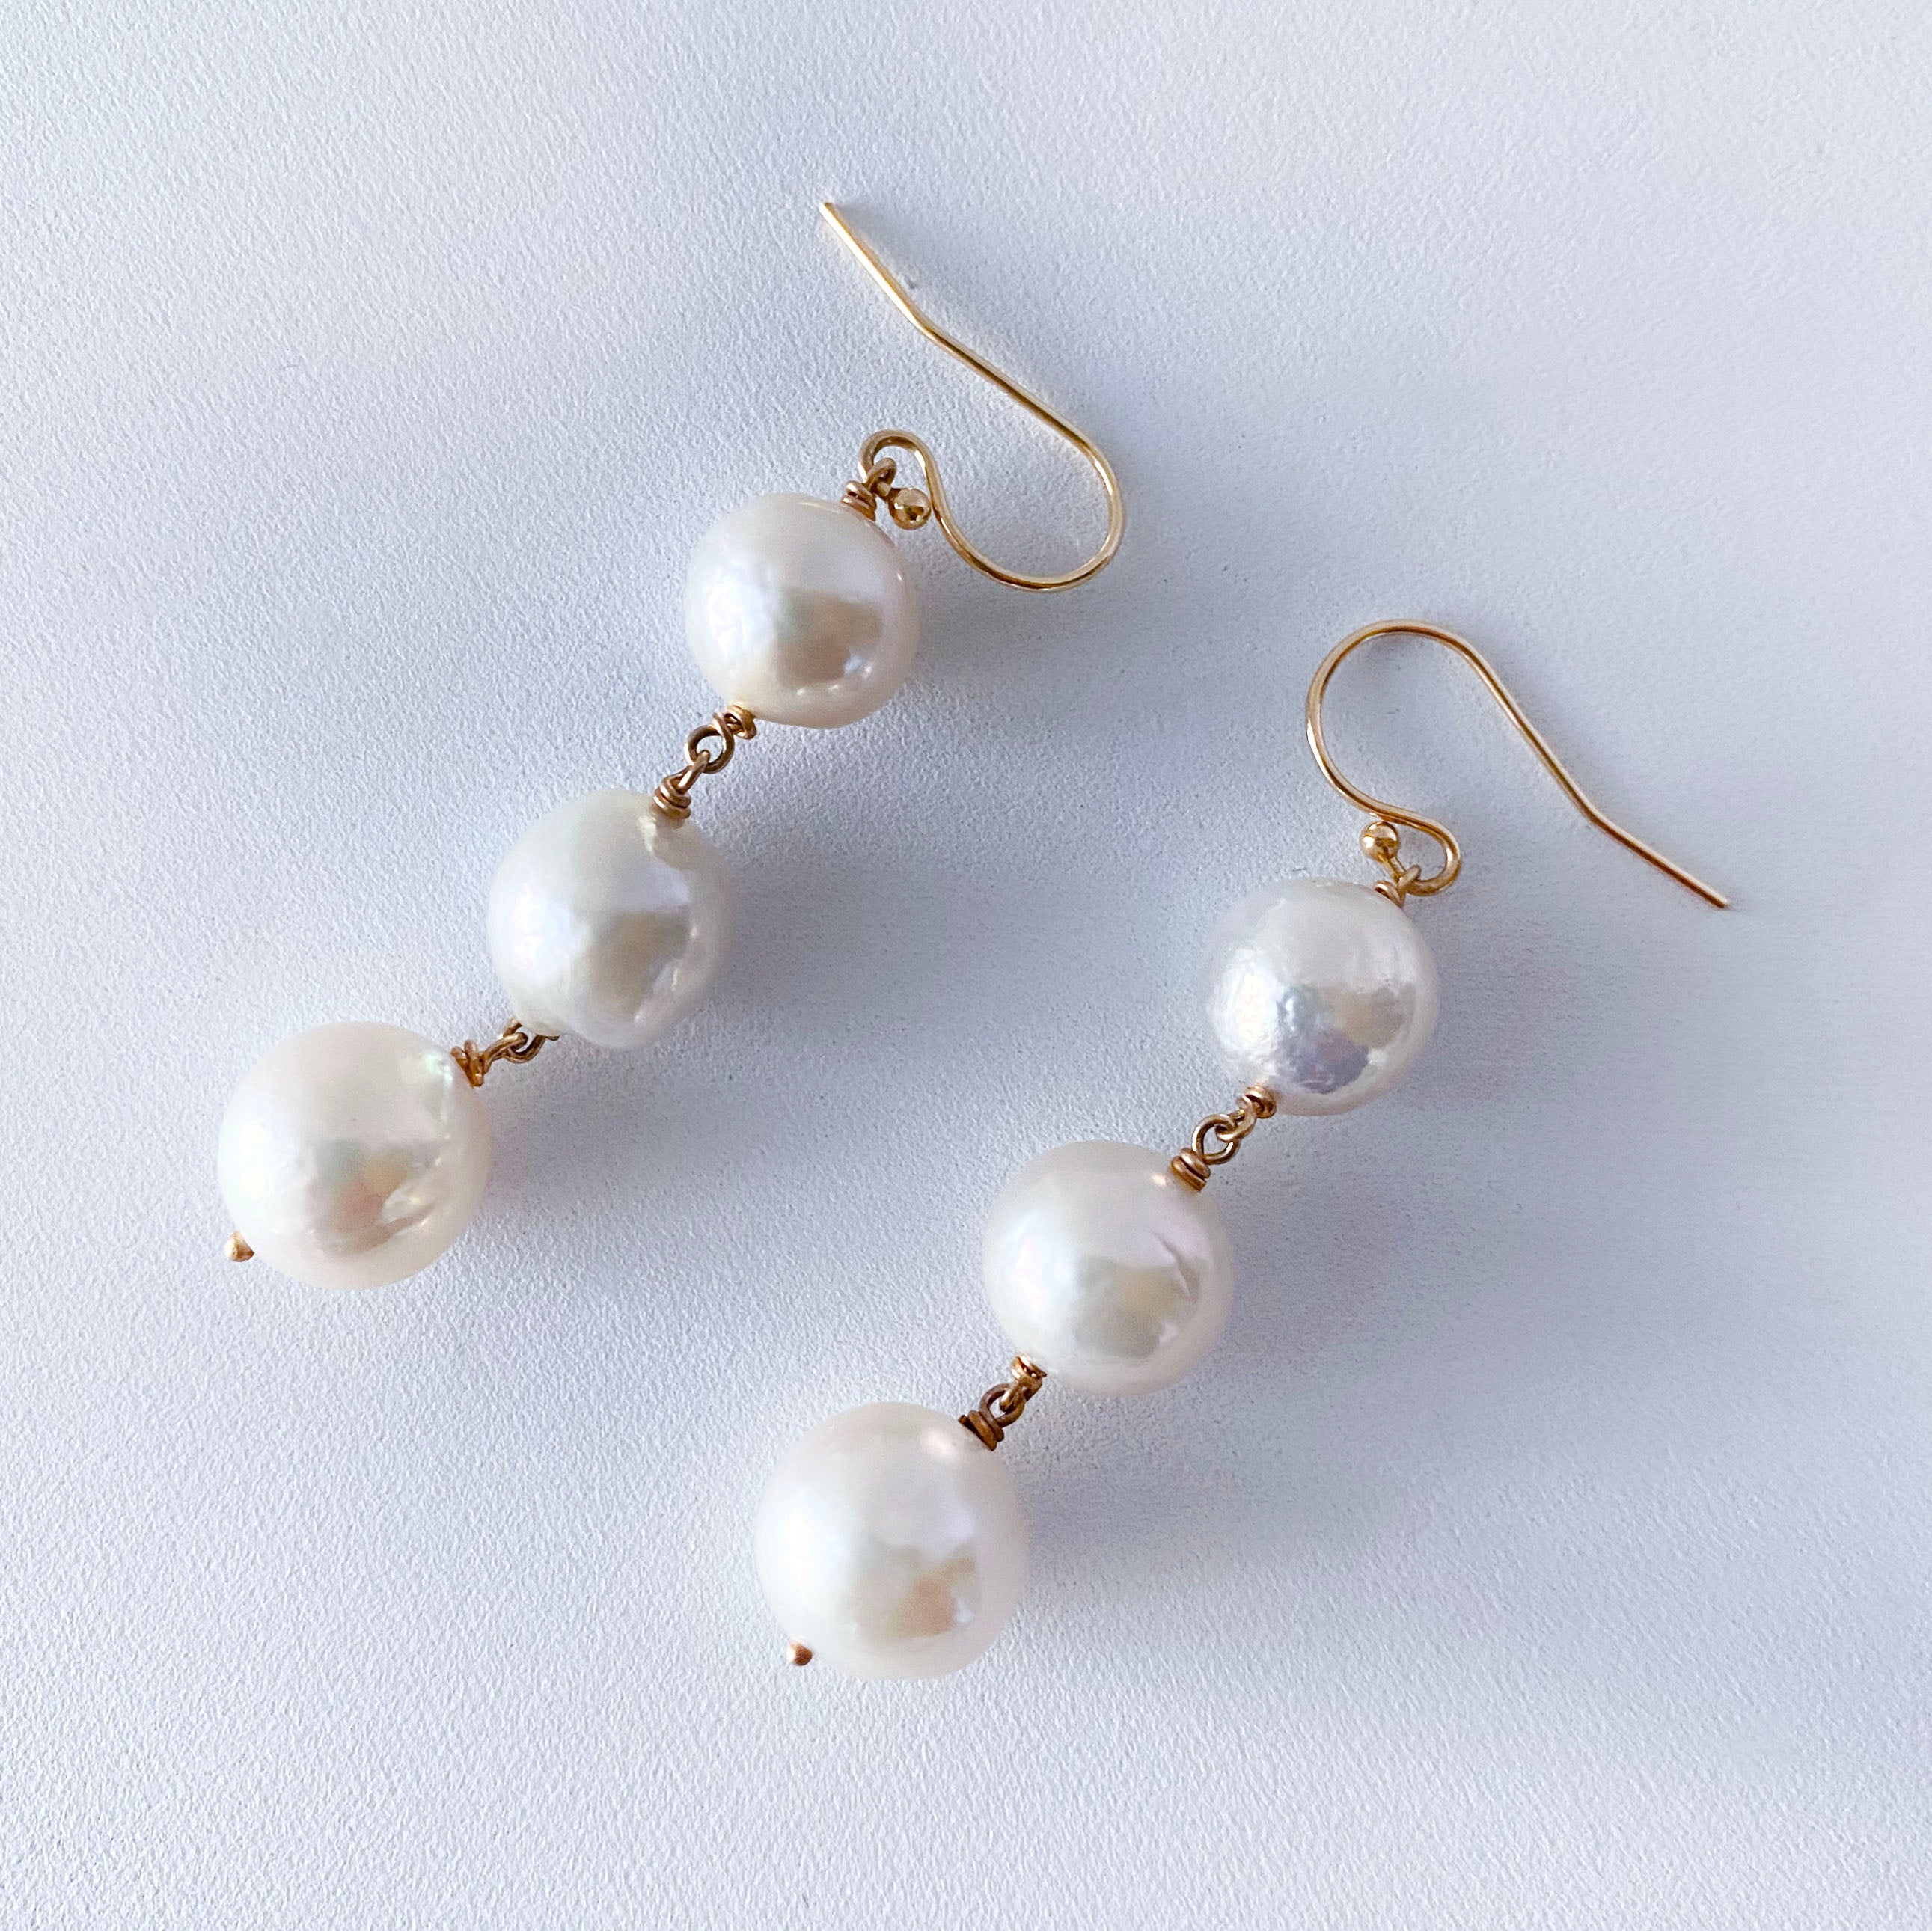 Simple and gorgeous pair of Earrings by Marina J. This pair is made with all Solid 14k Yellow Gold wirings and hooks. Three beautiful white Pearls displaying a soft iridescent luster and texture hang between solid 14k Yellow Gold wiring. The luster